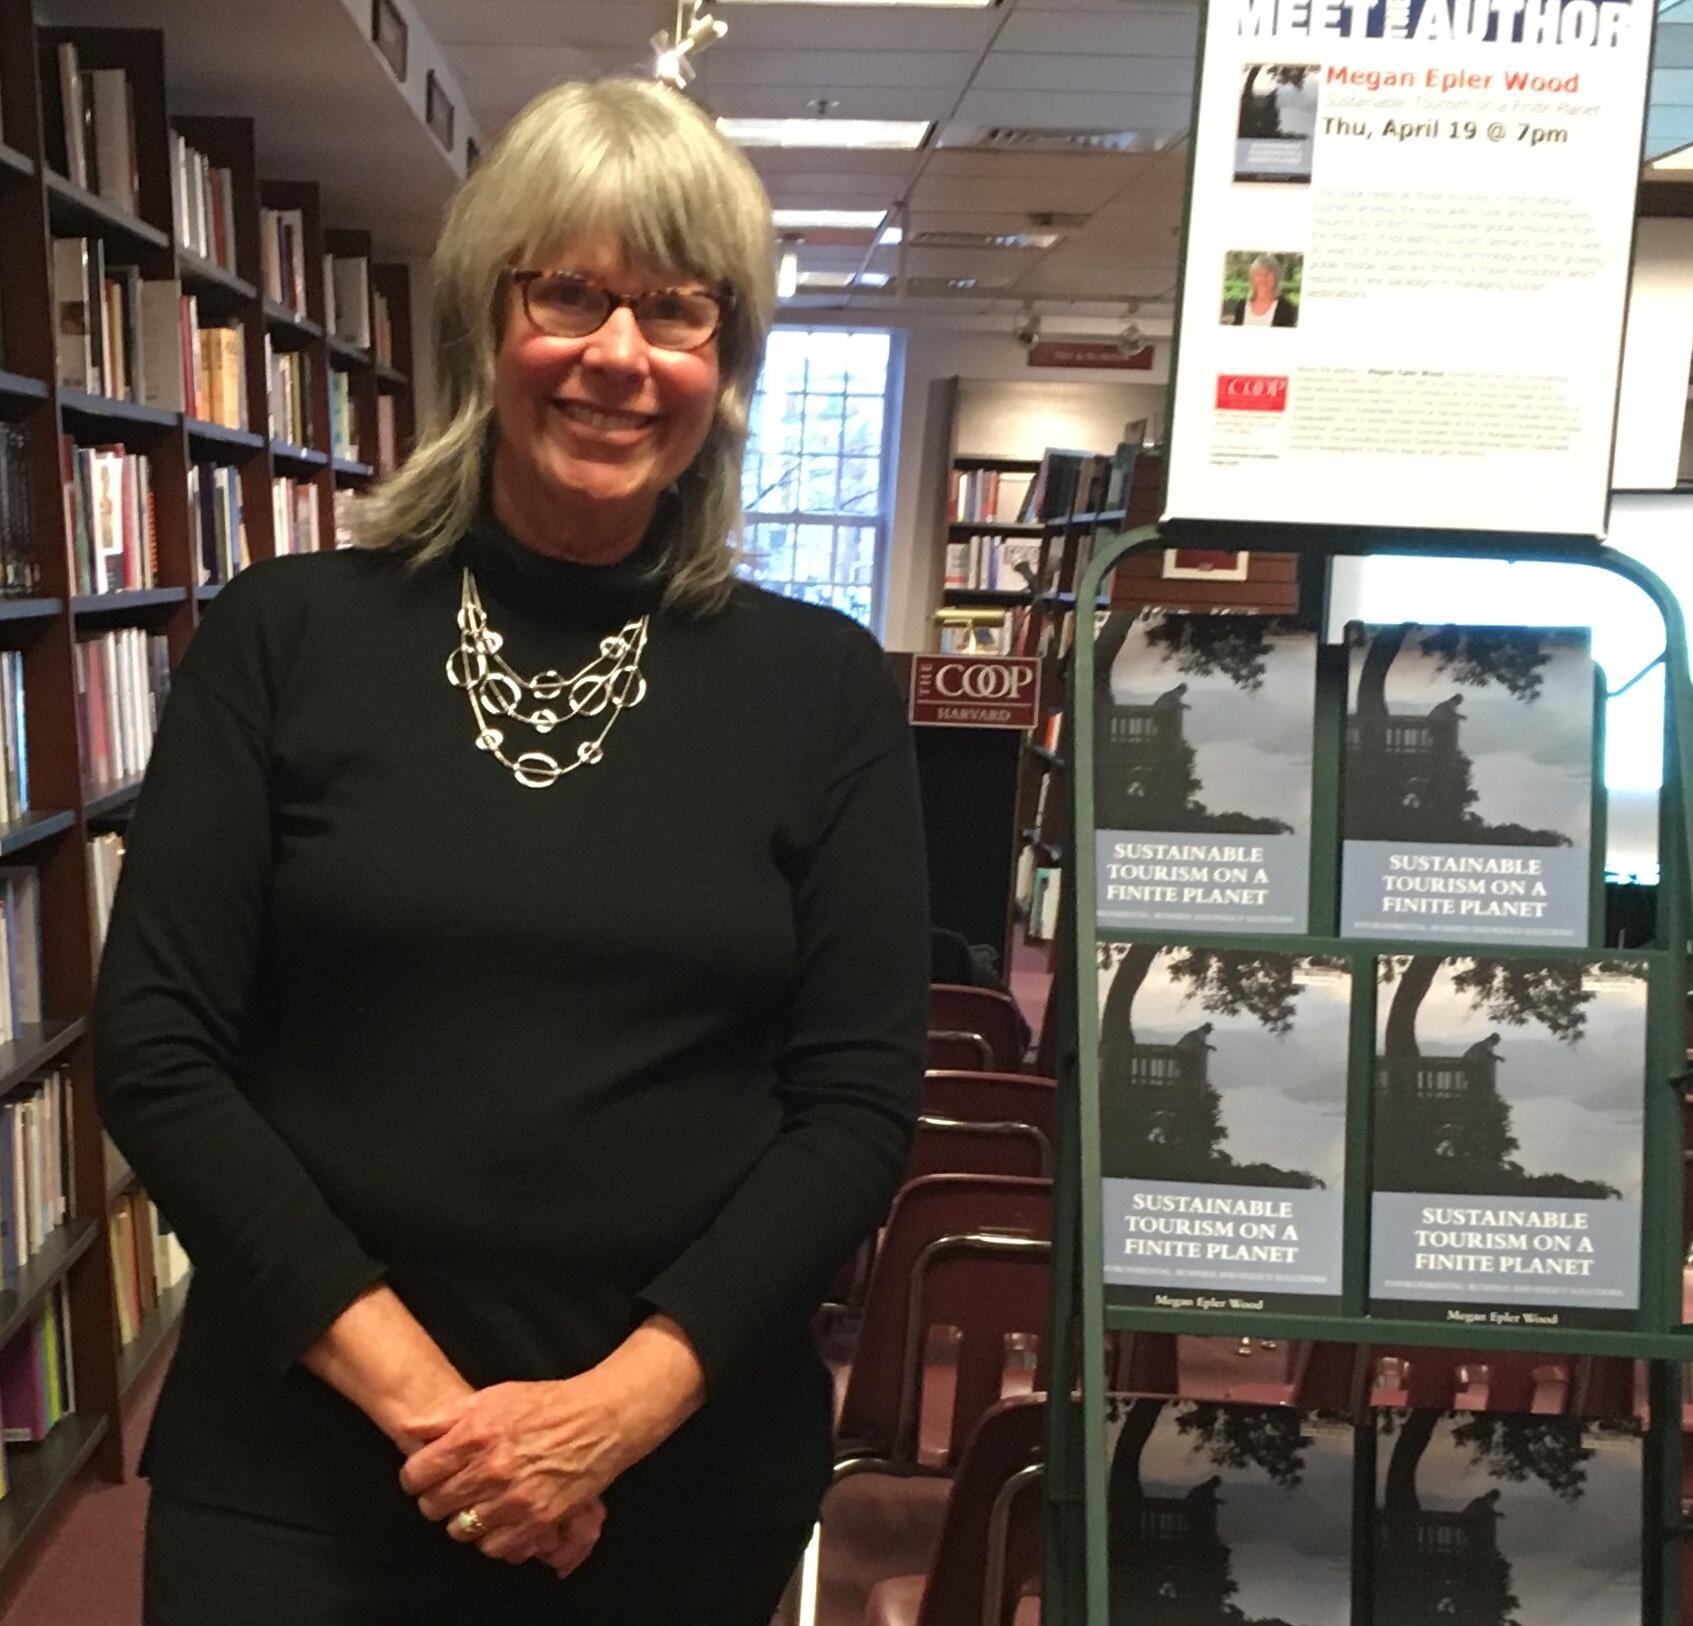 Megan Epler Wood speaking at The Harvard Coop Author Events in April 2018